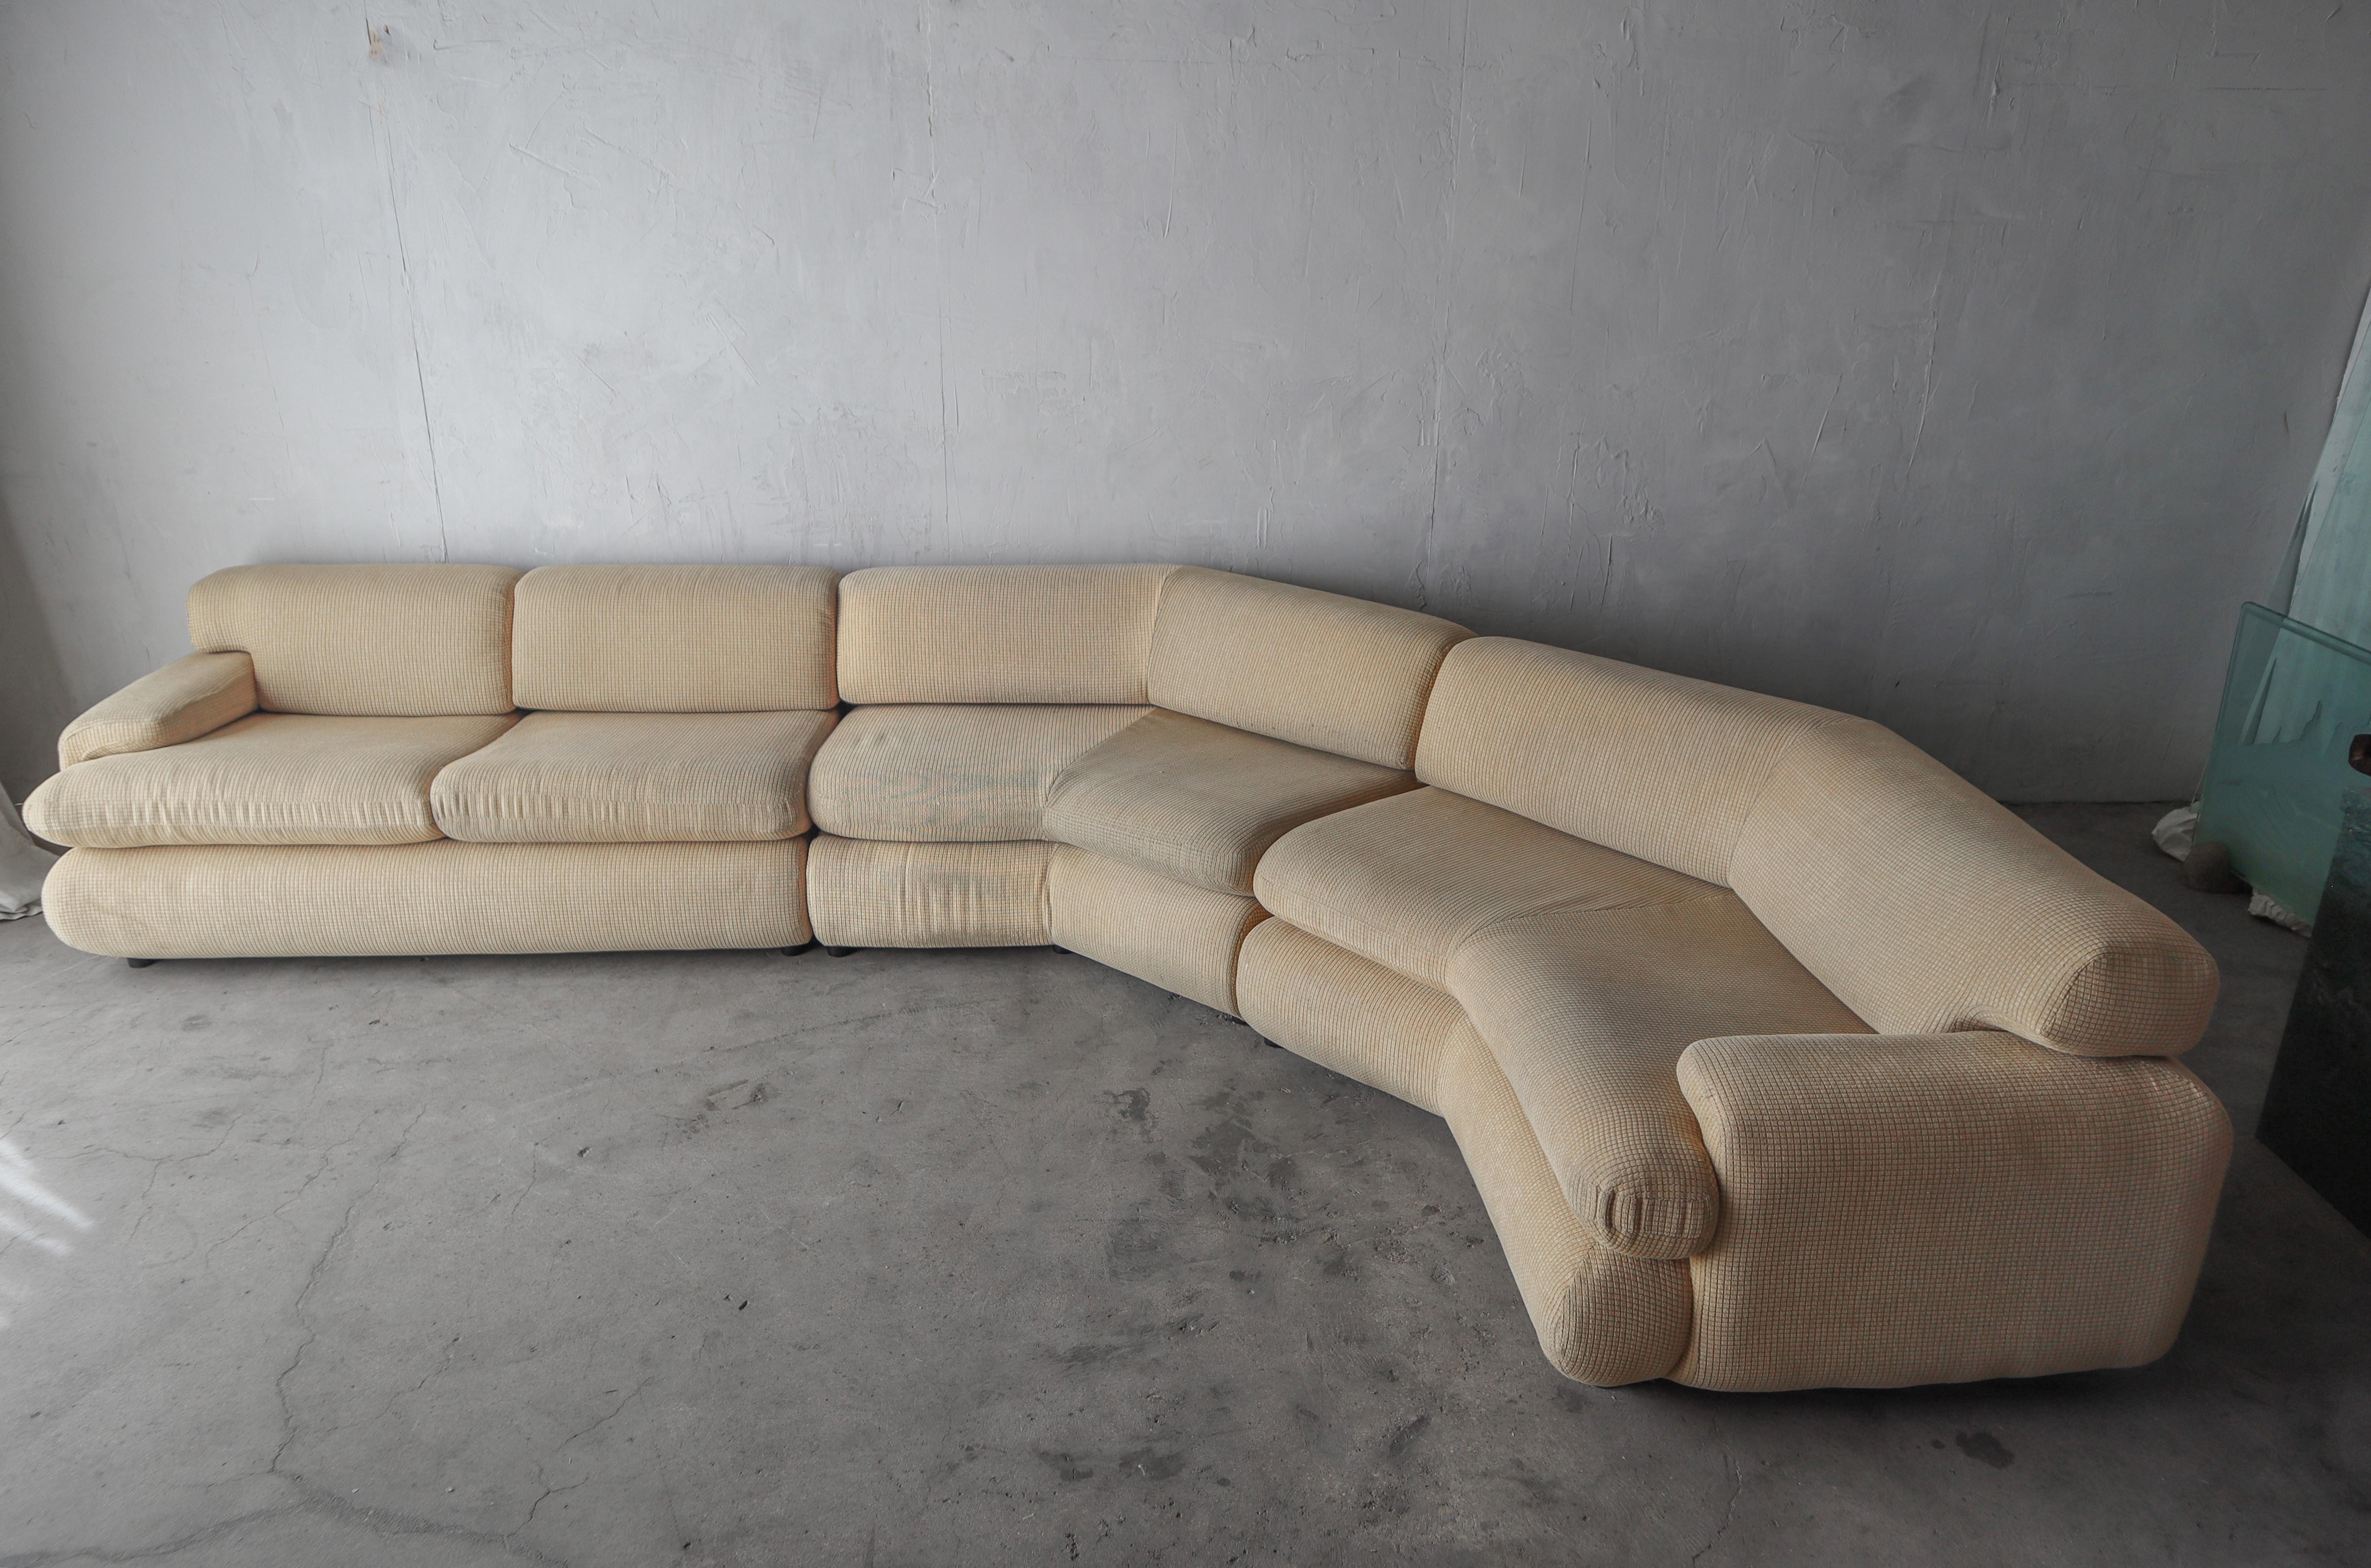 This 3 piece Preview sectional sofa is great.  I love the details, it adds so much interest and design flair.  Taking it from a simple sectional to a real designer piece.

The sofa is being sold as found.  The framework is solid and the foam is